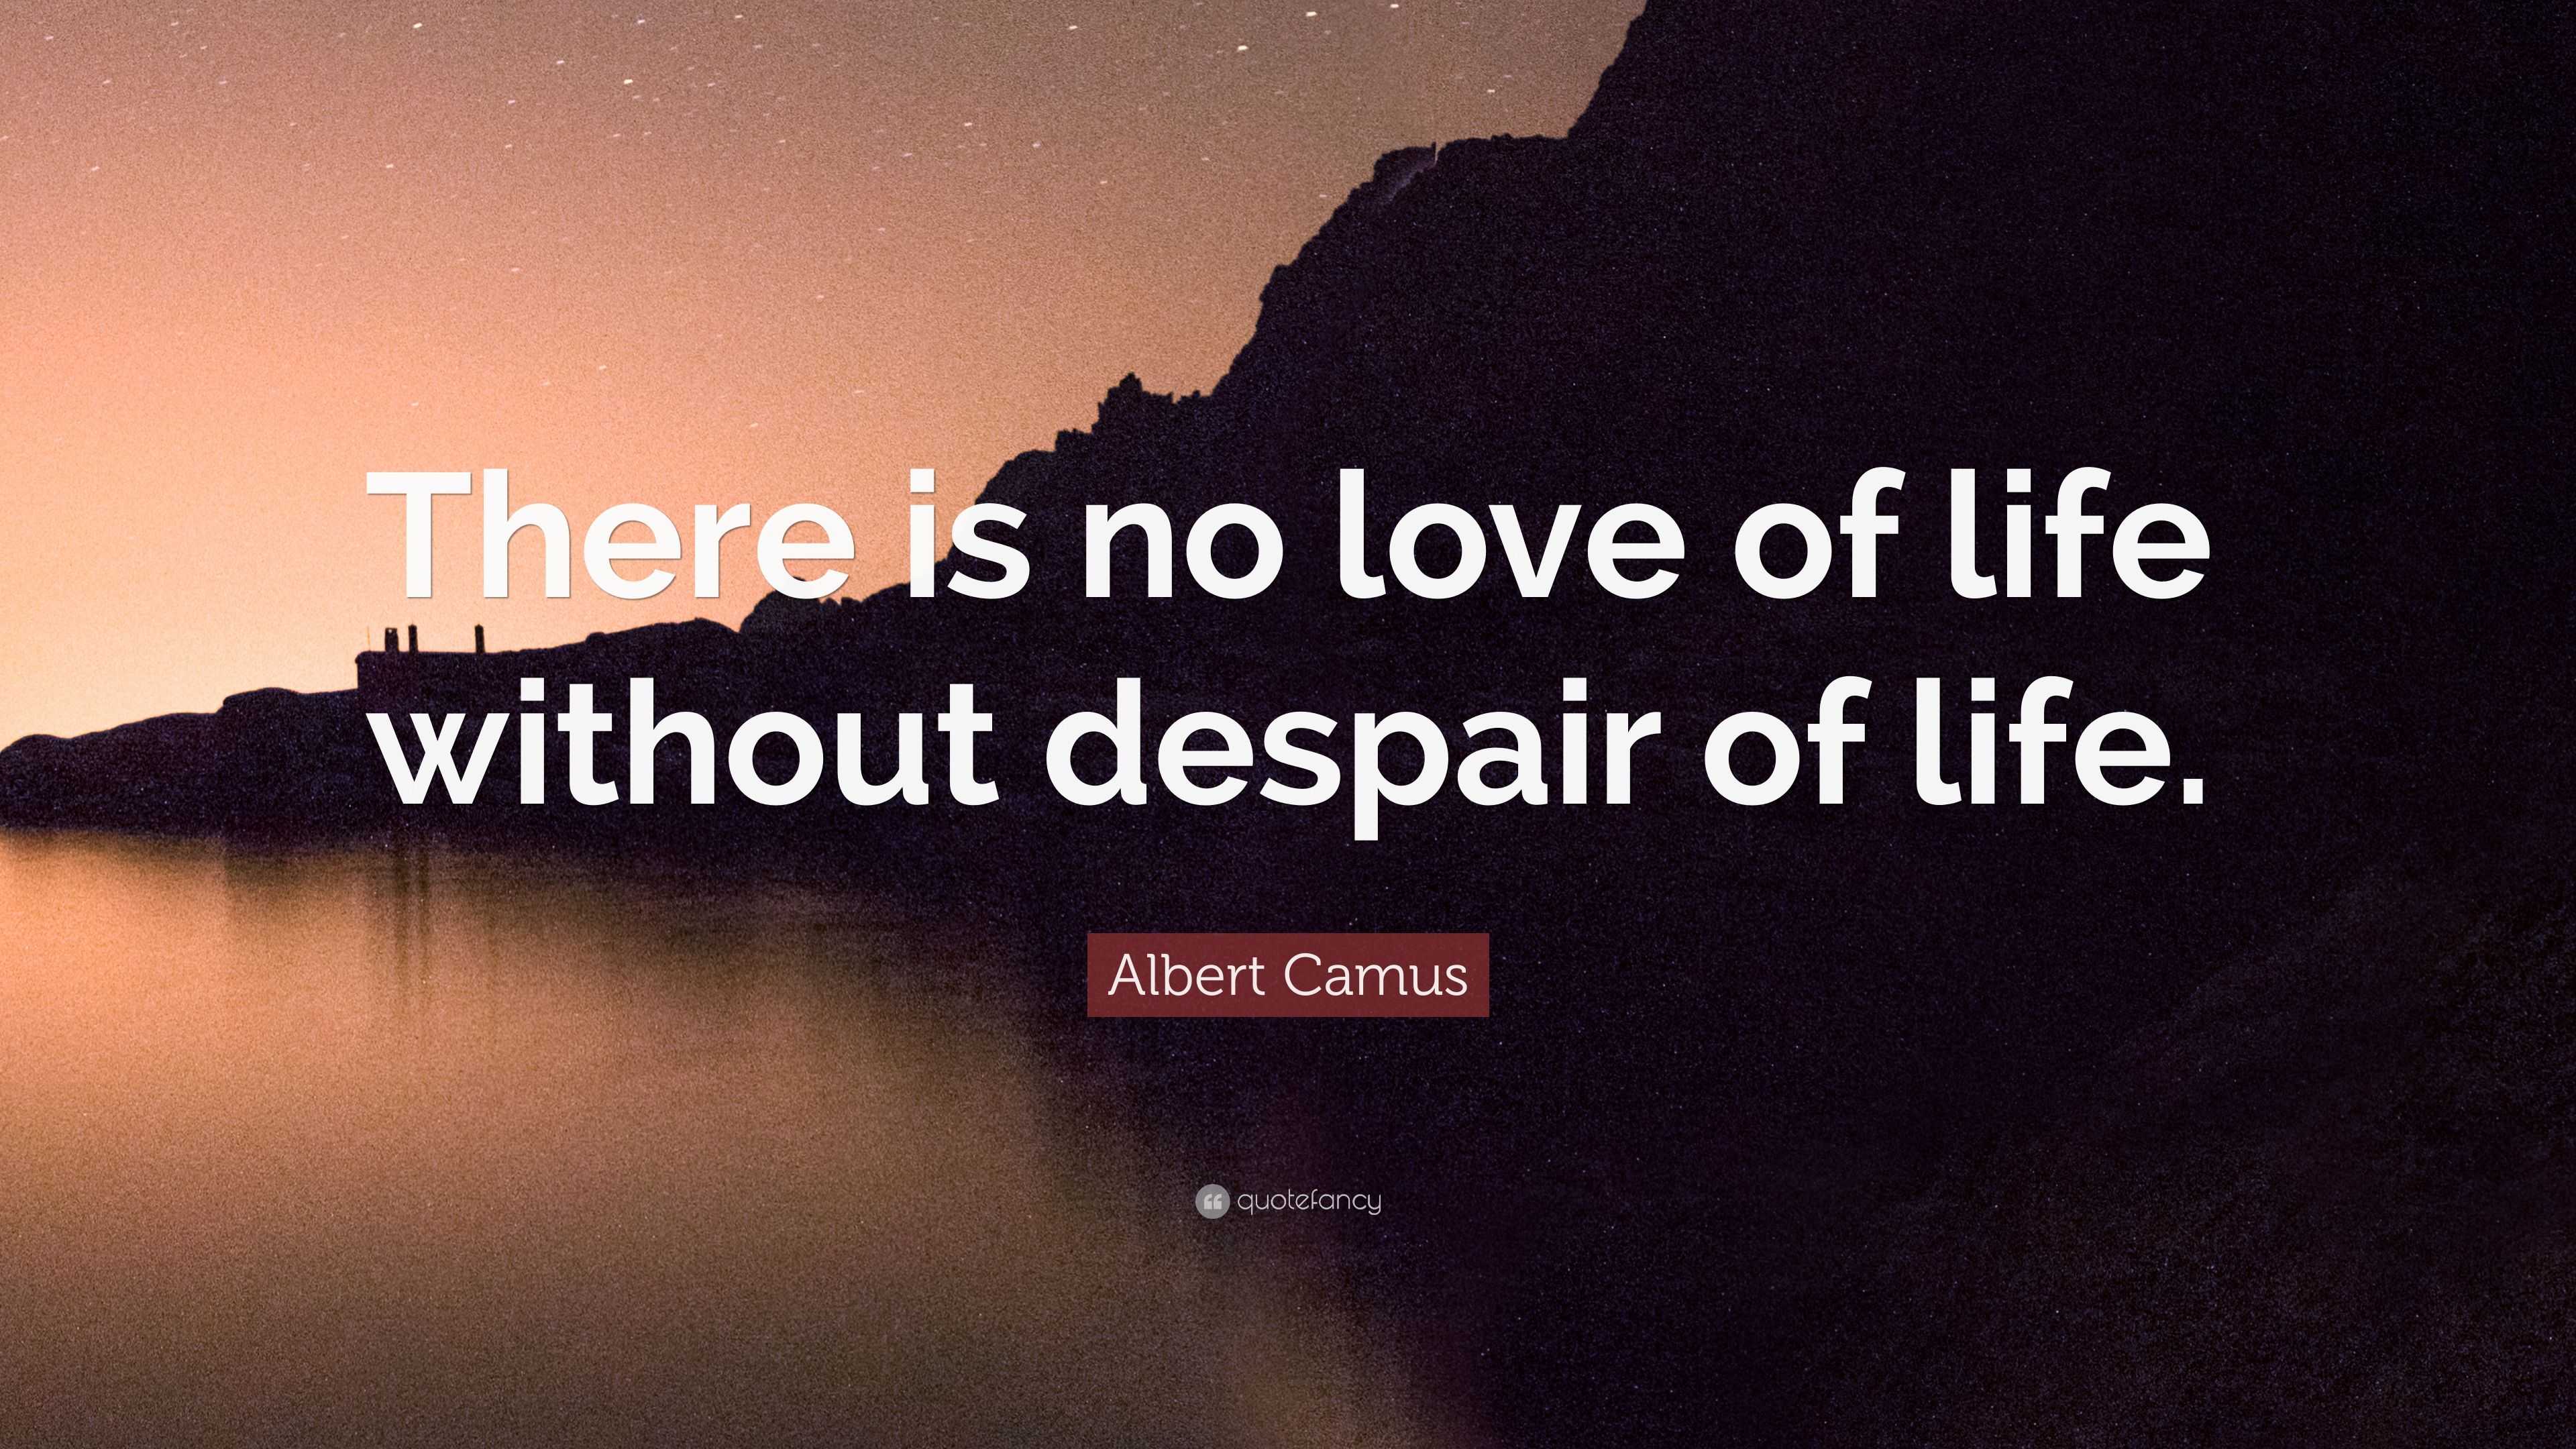 Albert Camus Quote “There is no love of life without despair of life